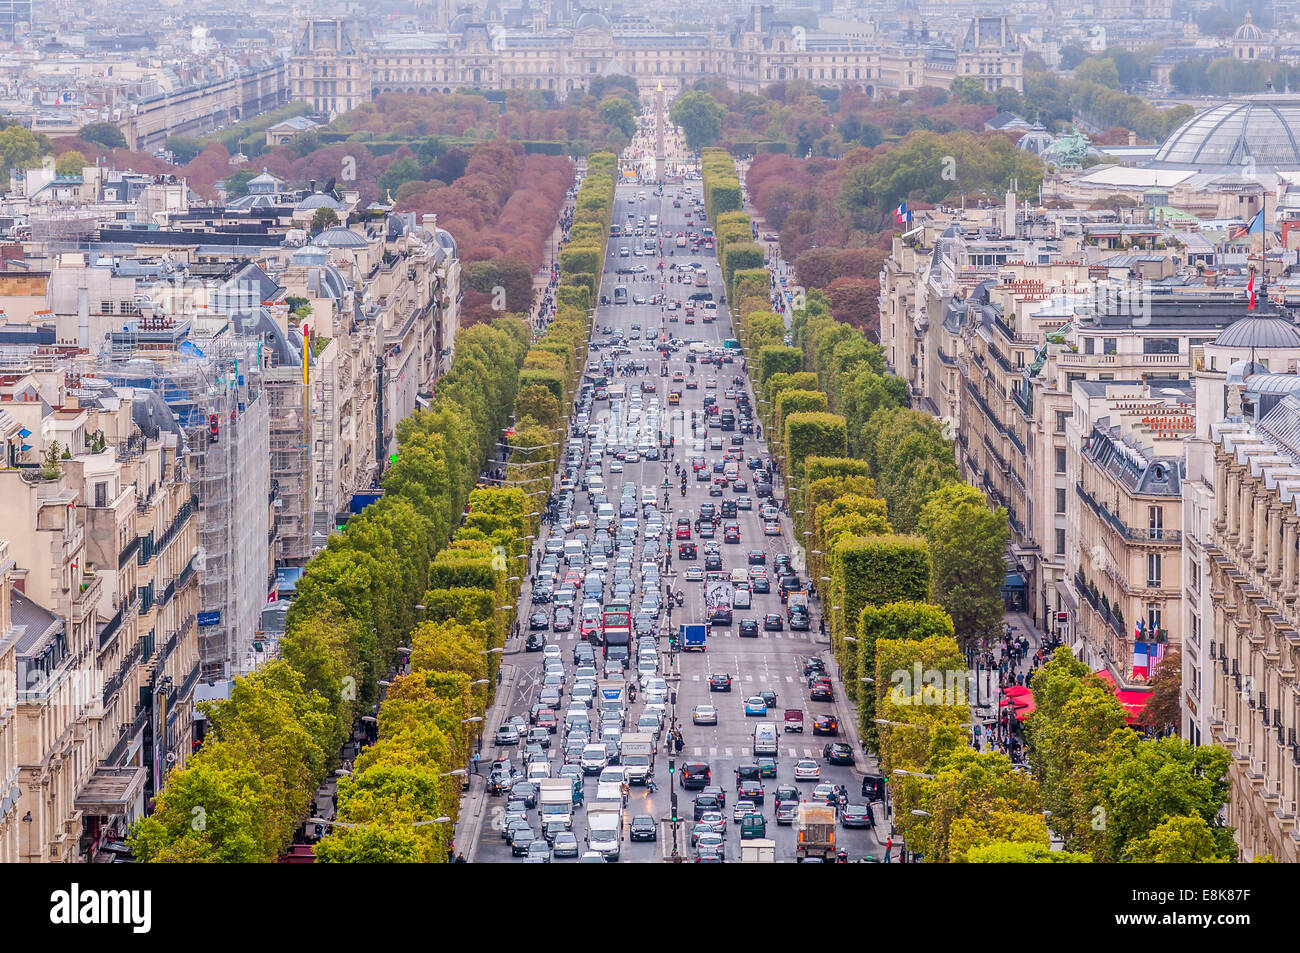 A look down the Champs Elysees as seen from the top of the Arch de Triomphe Paris France. Stock Photo